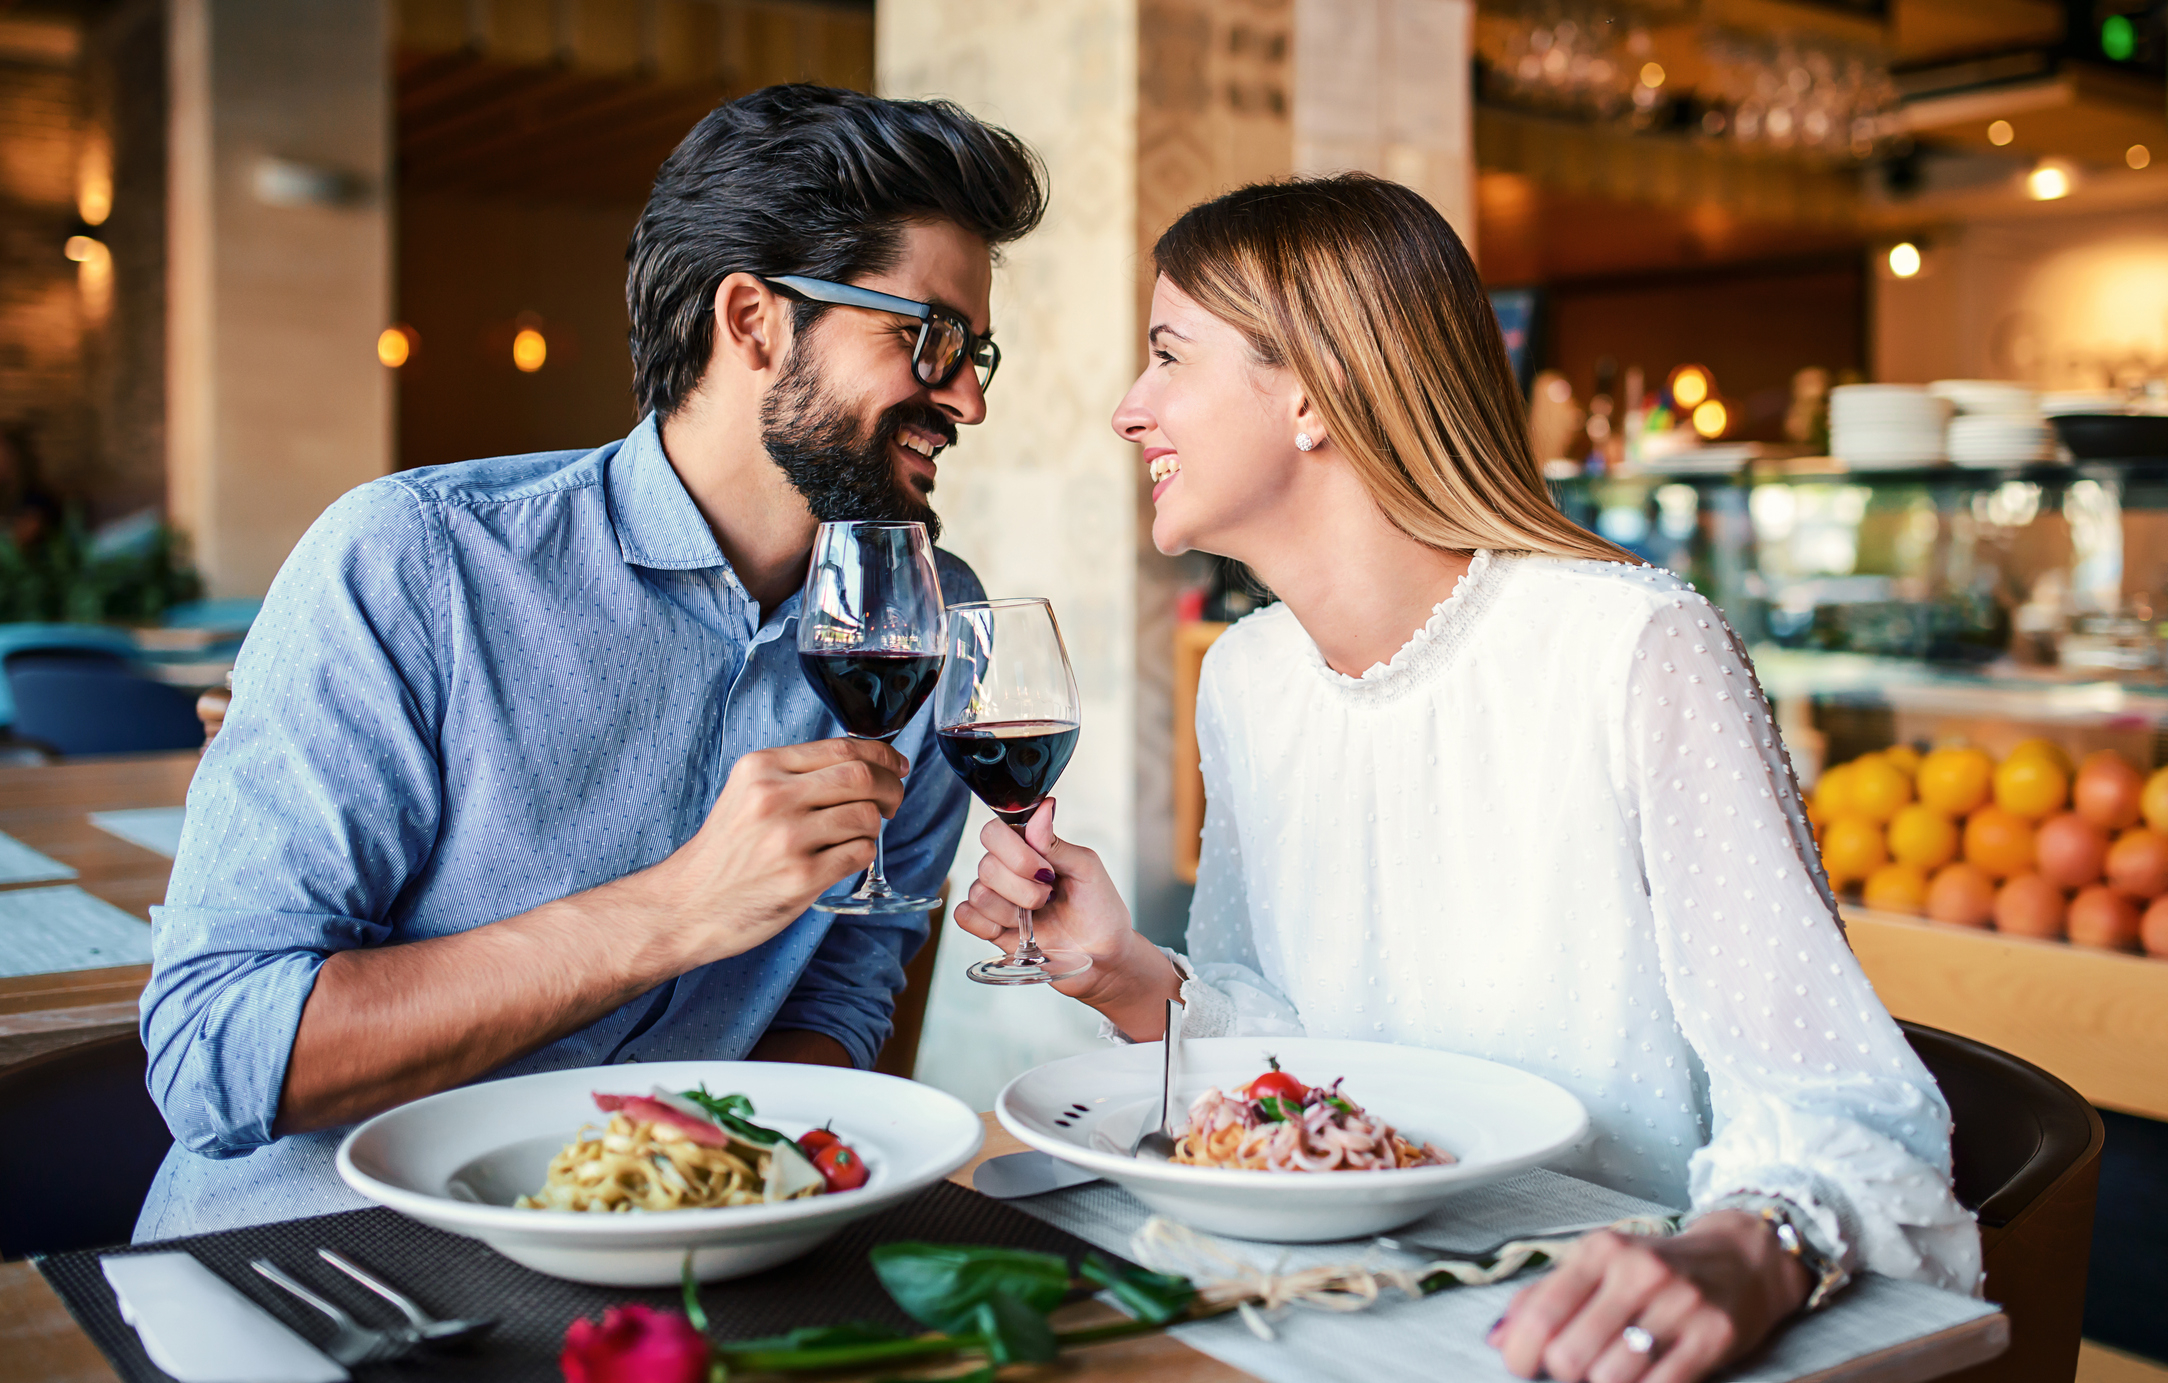 Two people enjoying a meal and toasting with wine glasses at a restaurant